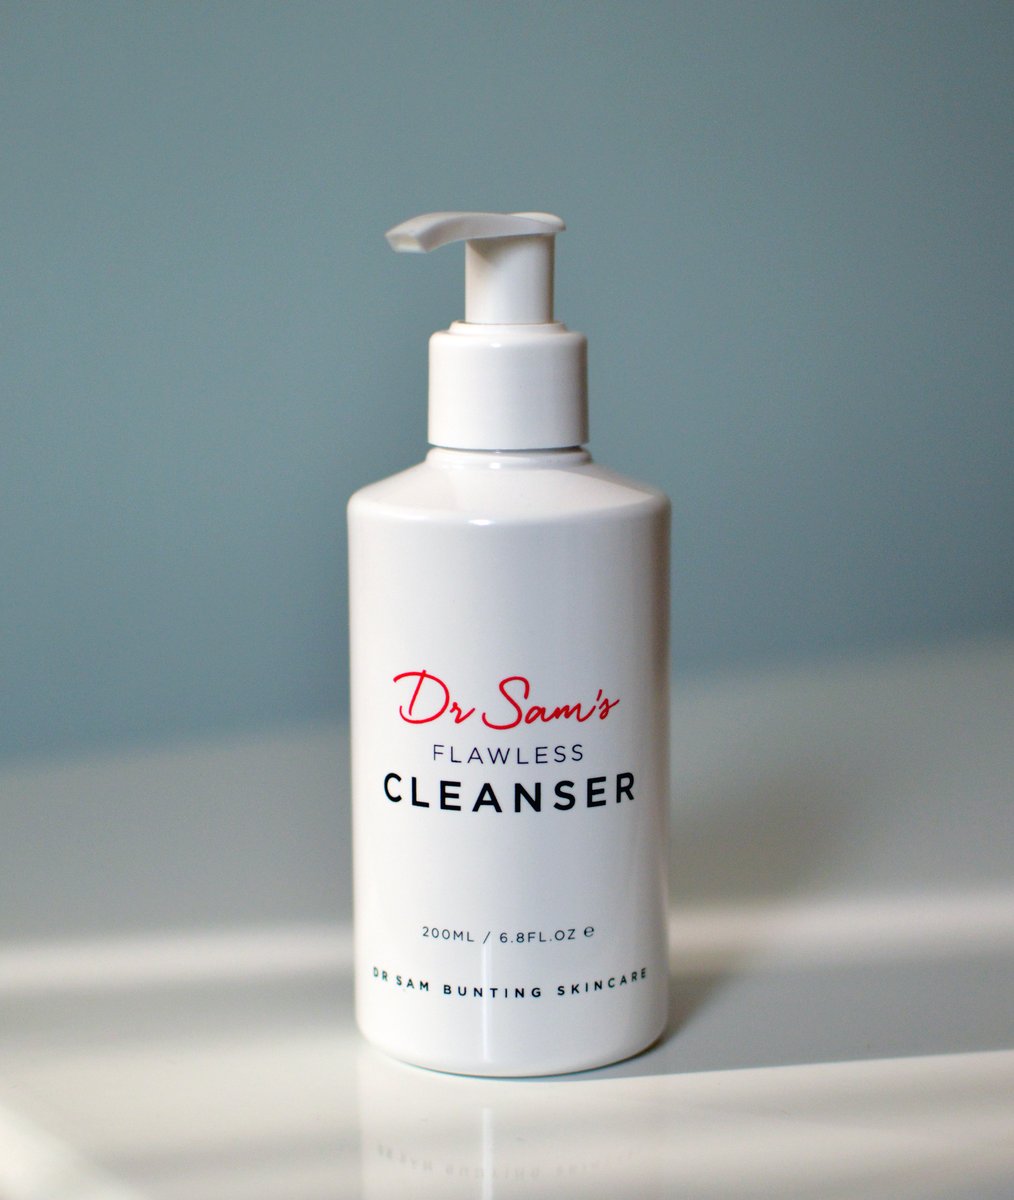 Dr Sam's Flawless Cleanser
Review + Discount Code

inspirationshaveinone.blogspot.com/2023/10/dr-sam…

#bbloggers #cleanser #drsam #drsambunting #flawlesscleanser #skincarereview #skincareroutine #discountcode